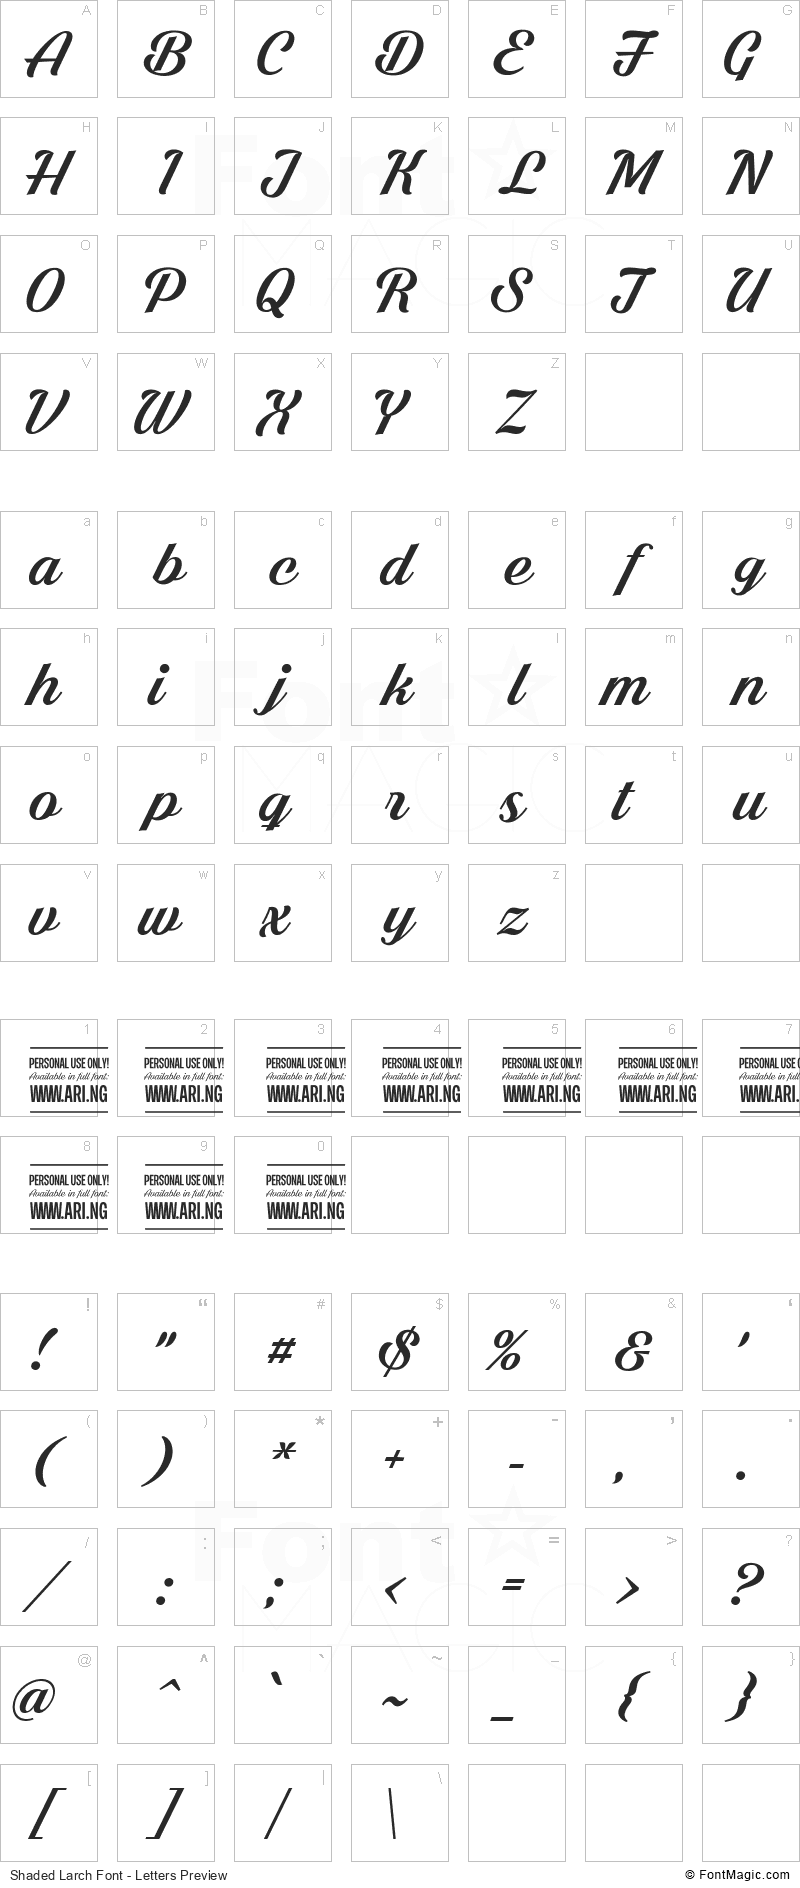 Shaded Larch Font - All Latters Preview Chart